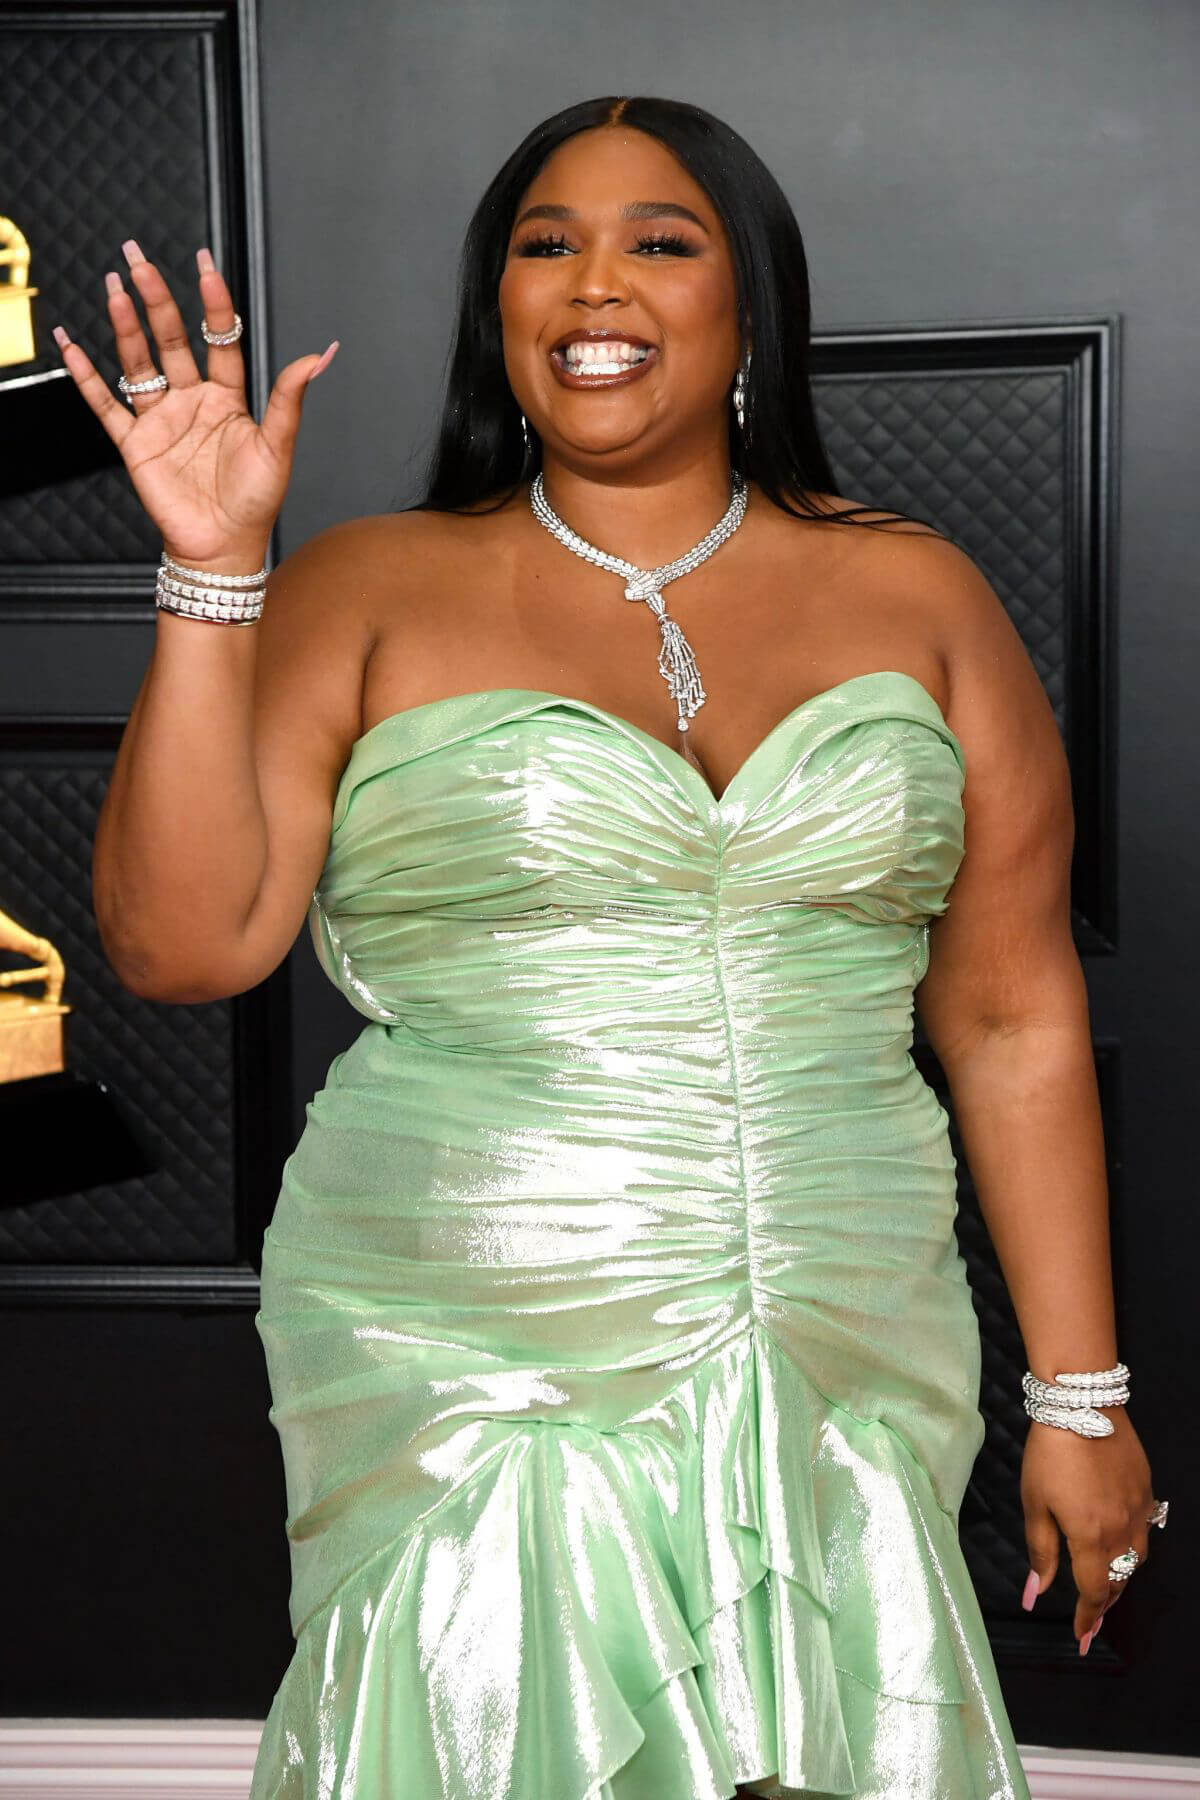 Lizzo Seen at 2021 Grammy Awards in Los Angeles 03/14/2021